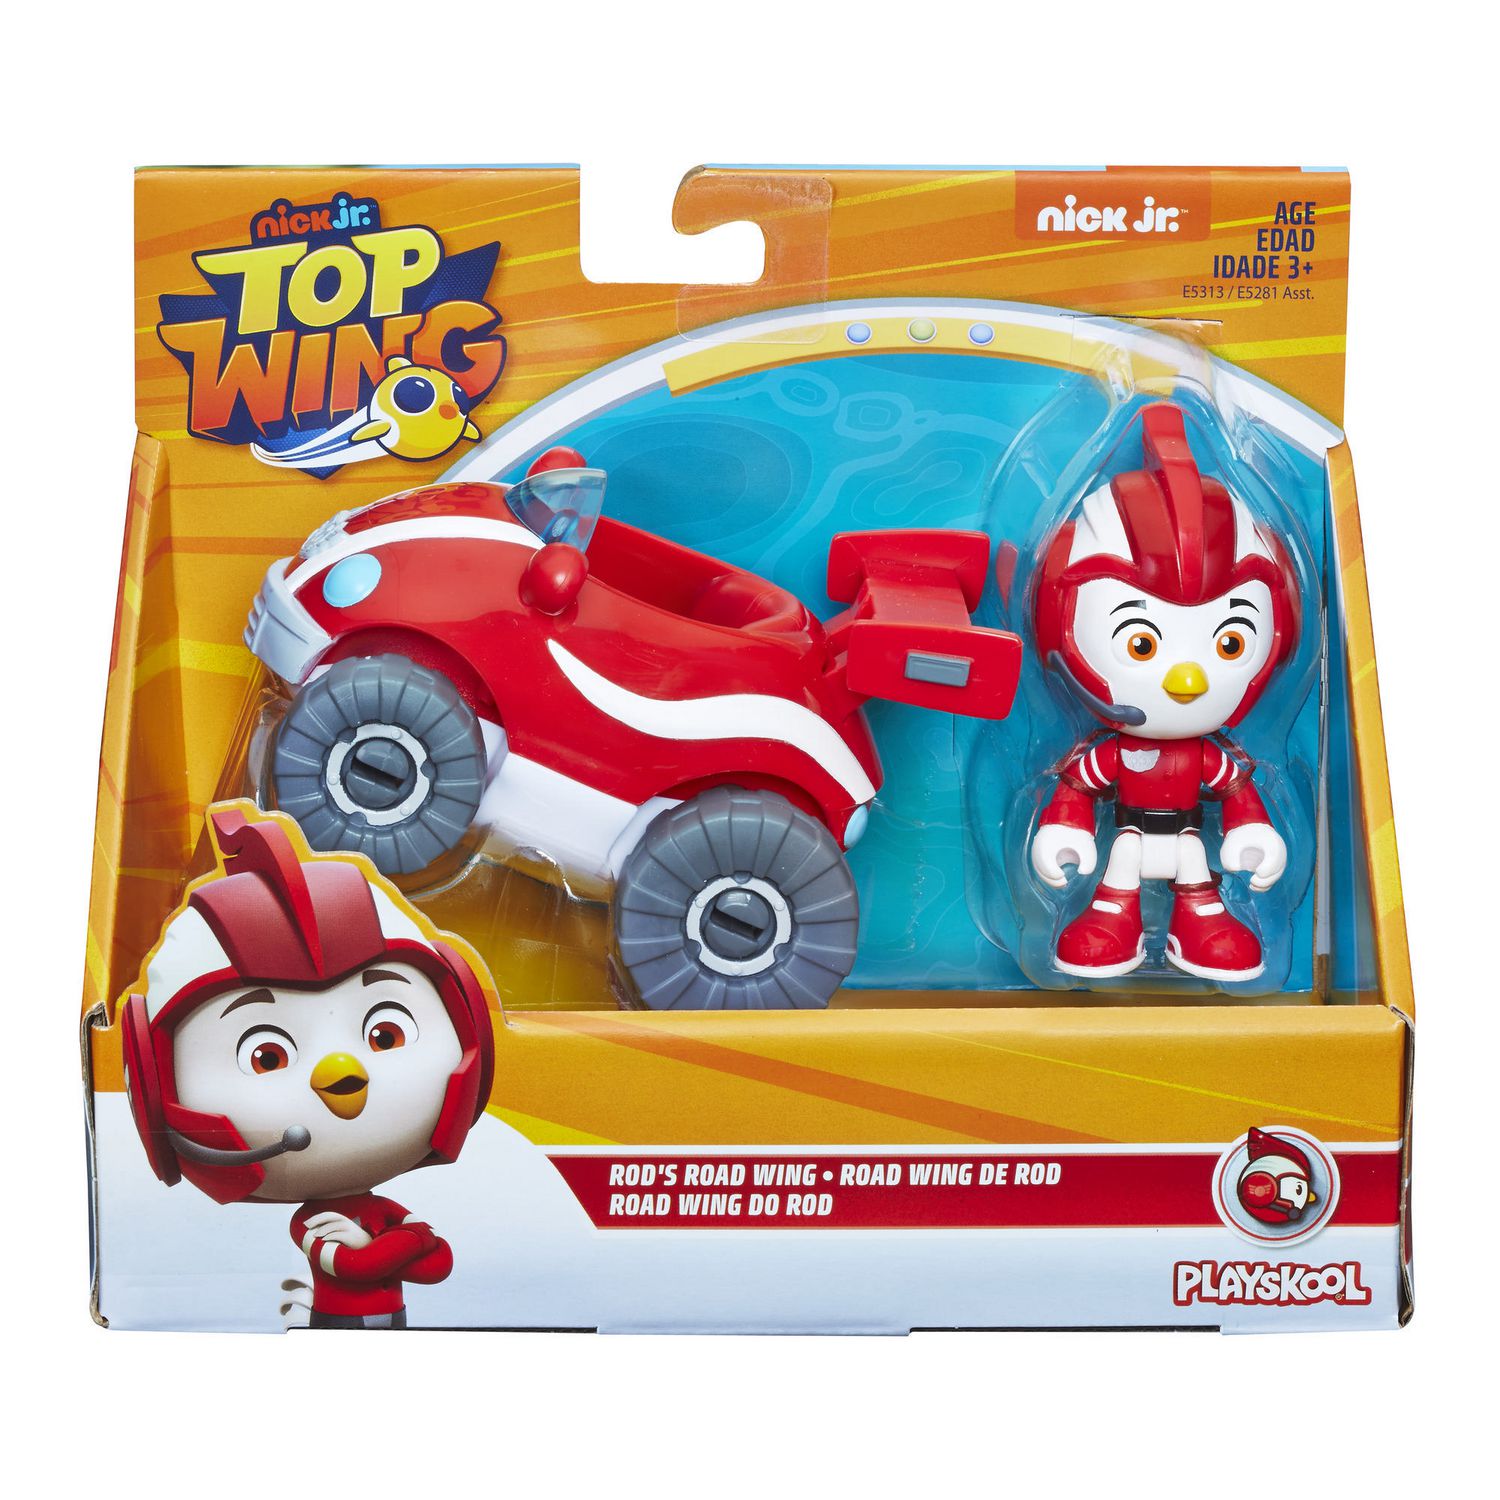 excess frozen extend Top Wing Rod figure and vehicle | Walmart Canada